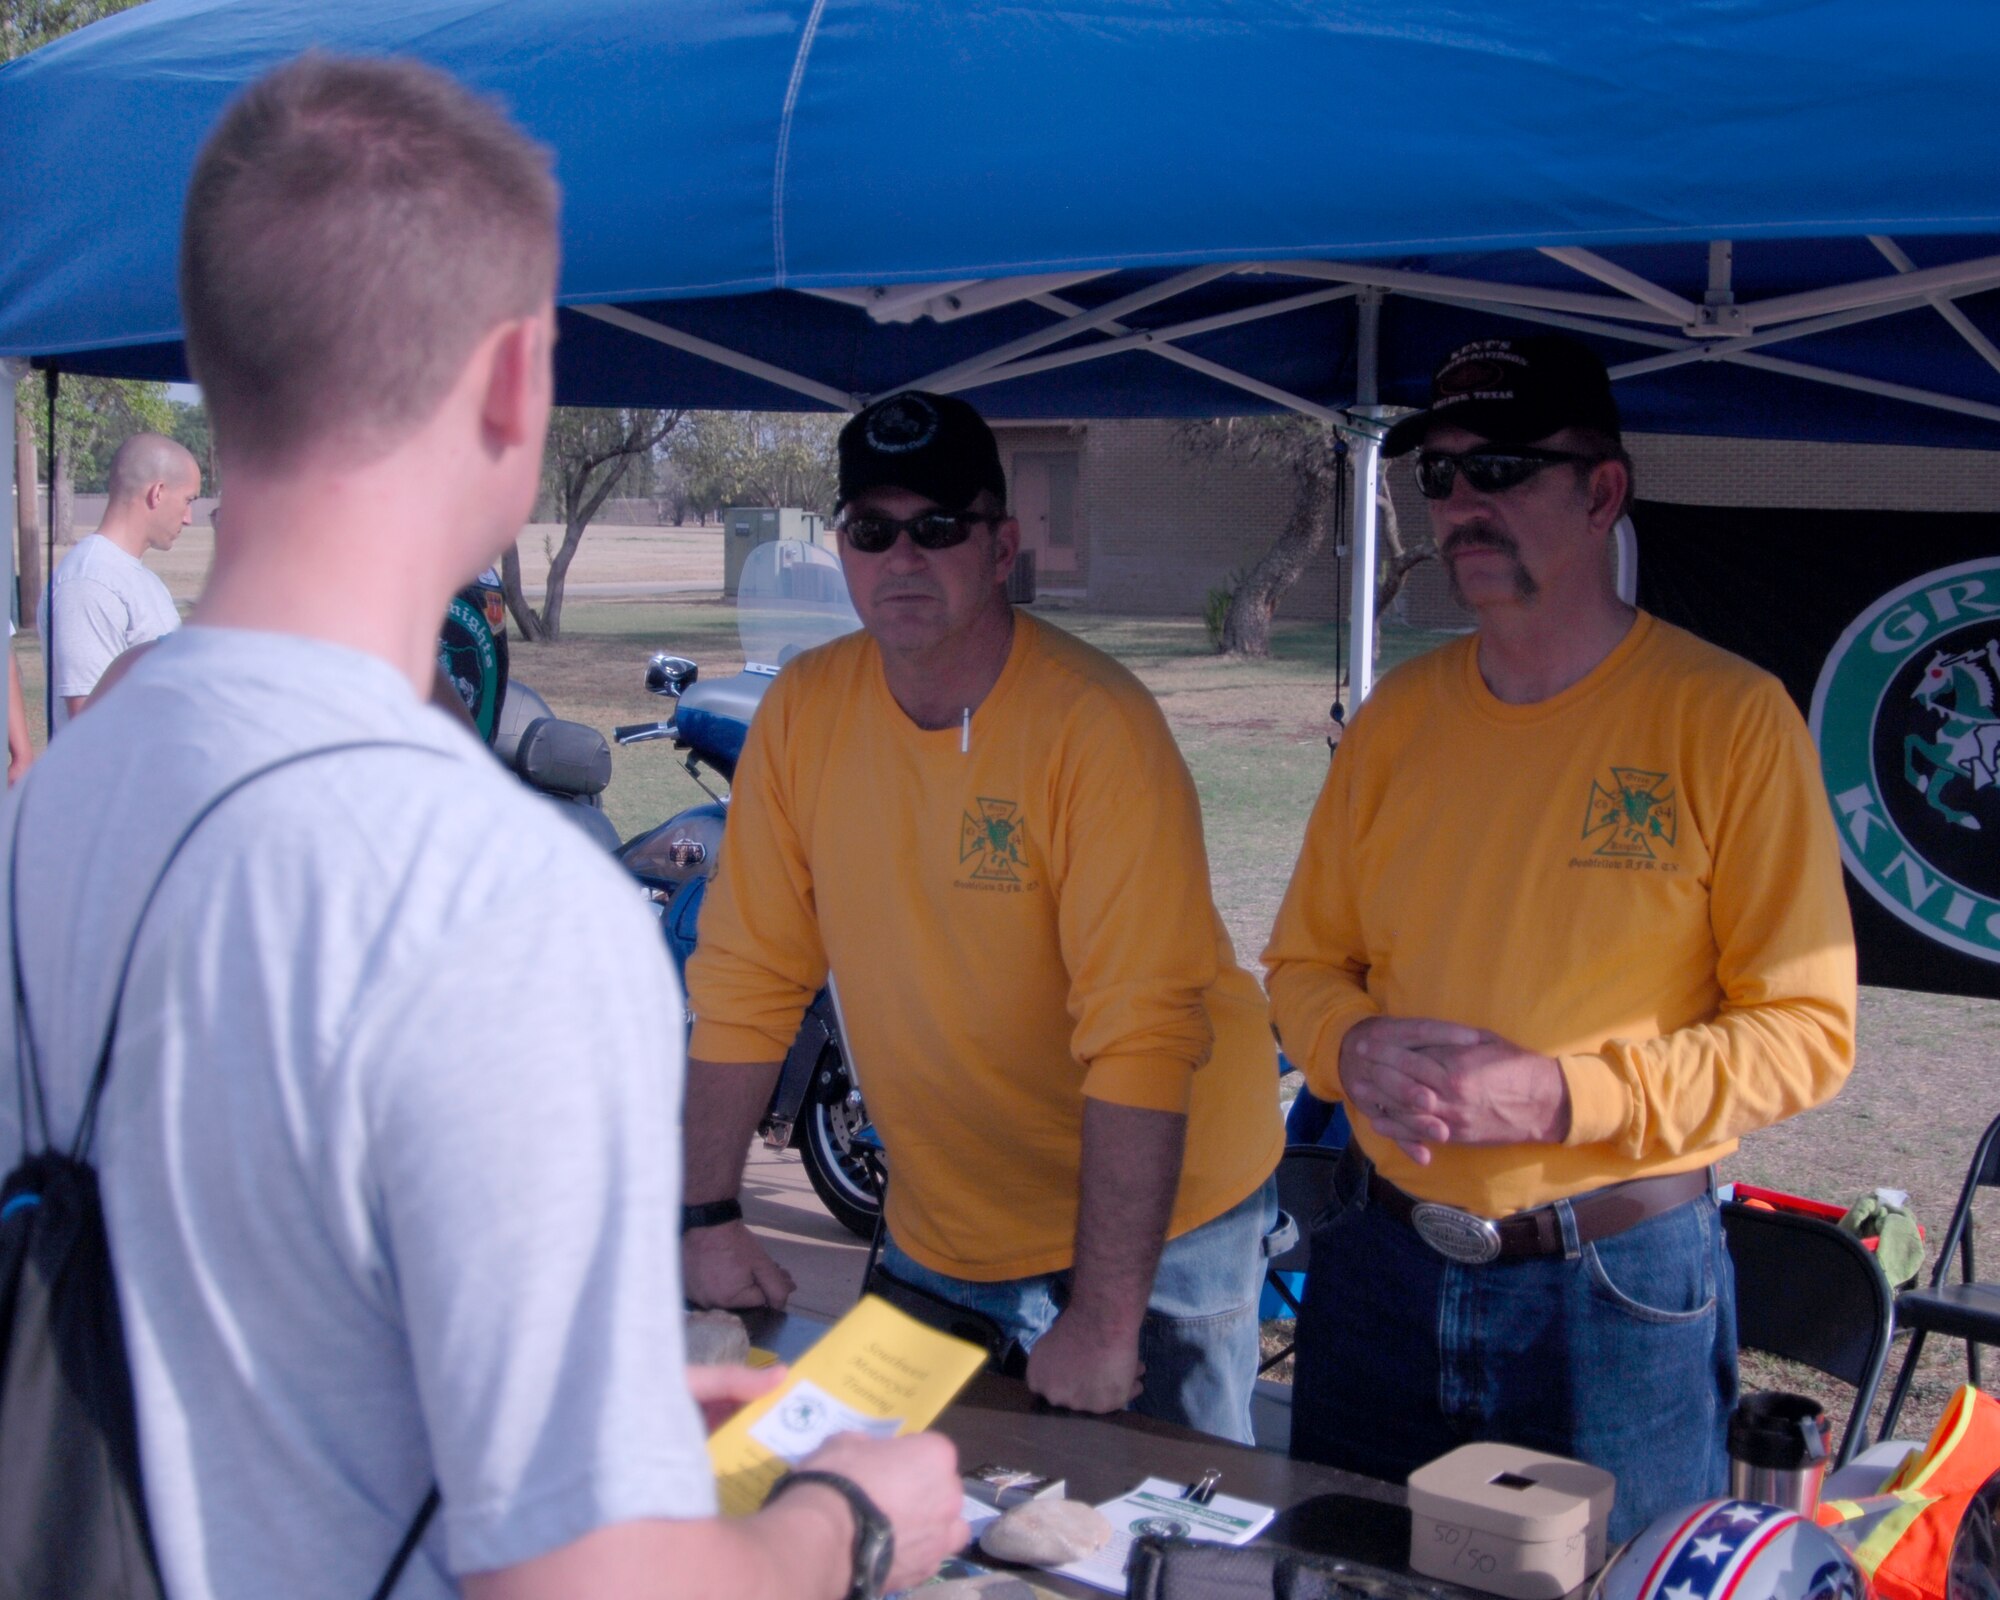 GOODFELLOW AIR FORCE BASE, Texas - Roy Powell (center) and Ken Roxburgh (right) with the Green Knights Military Motorcycle Club, Chapter 64, speak with an Airman about motorcycle safety during Safety Day activities May 27. The Green Knights promote and educate the on- and off-base communities on safe riding practices. (U.S. Air Force photo/Tech. Sgt. Jon DuMond)

